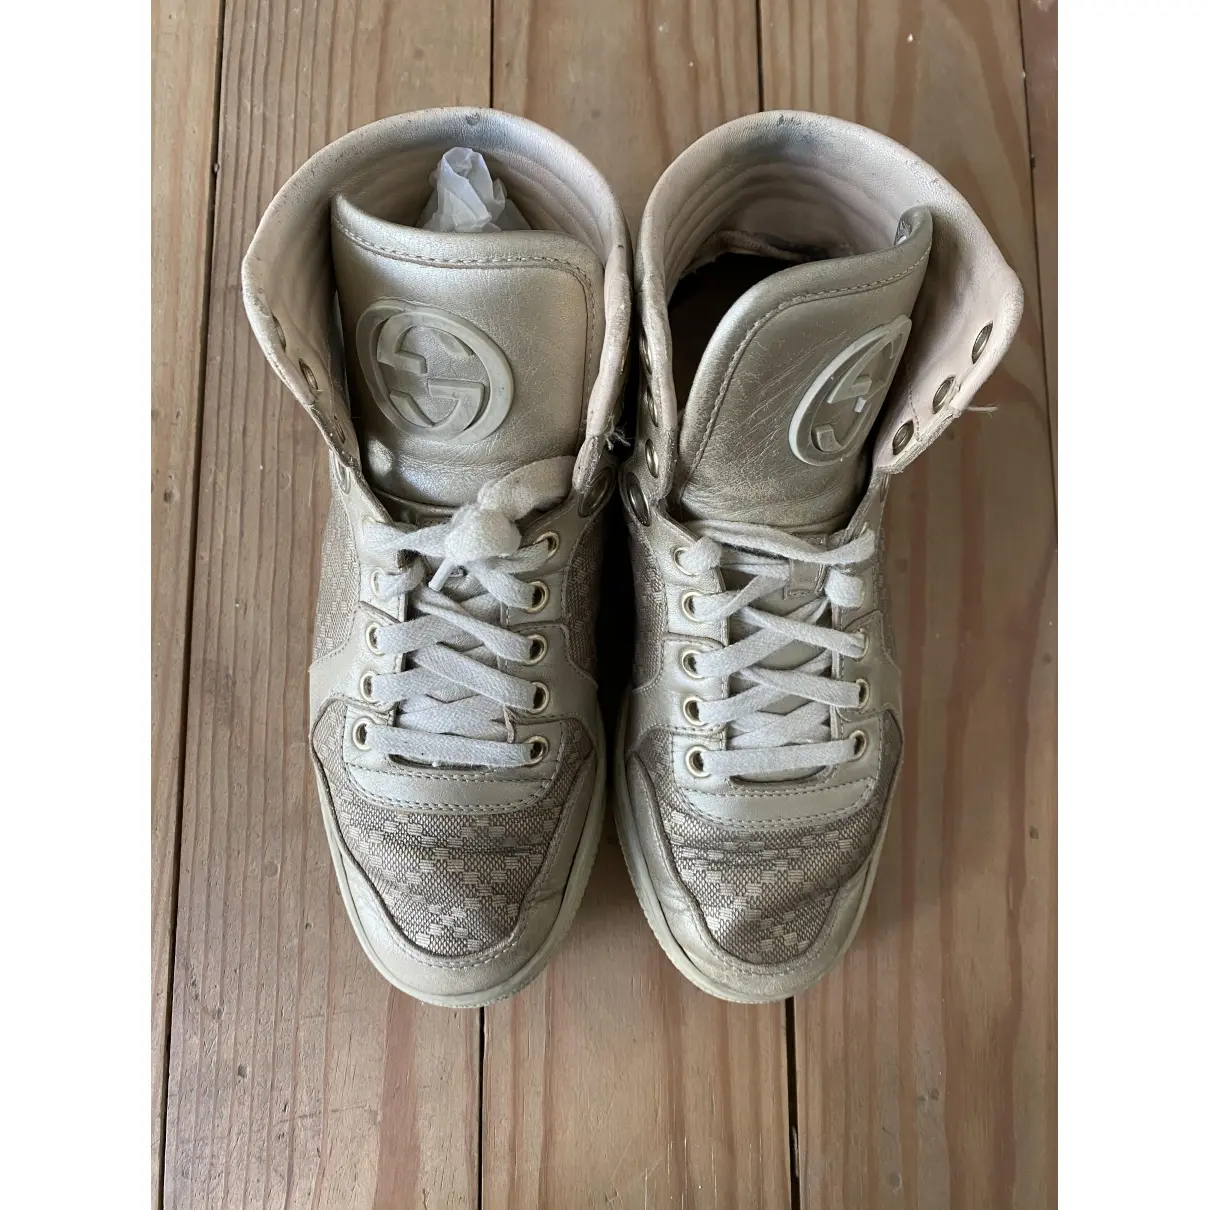 Gucci Leather trainers for sale